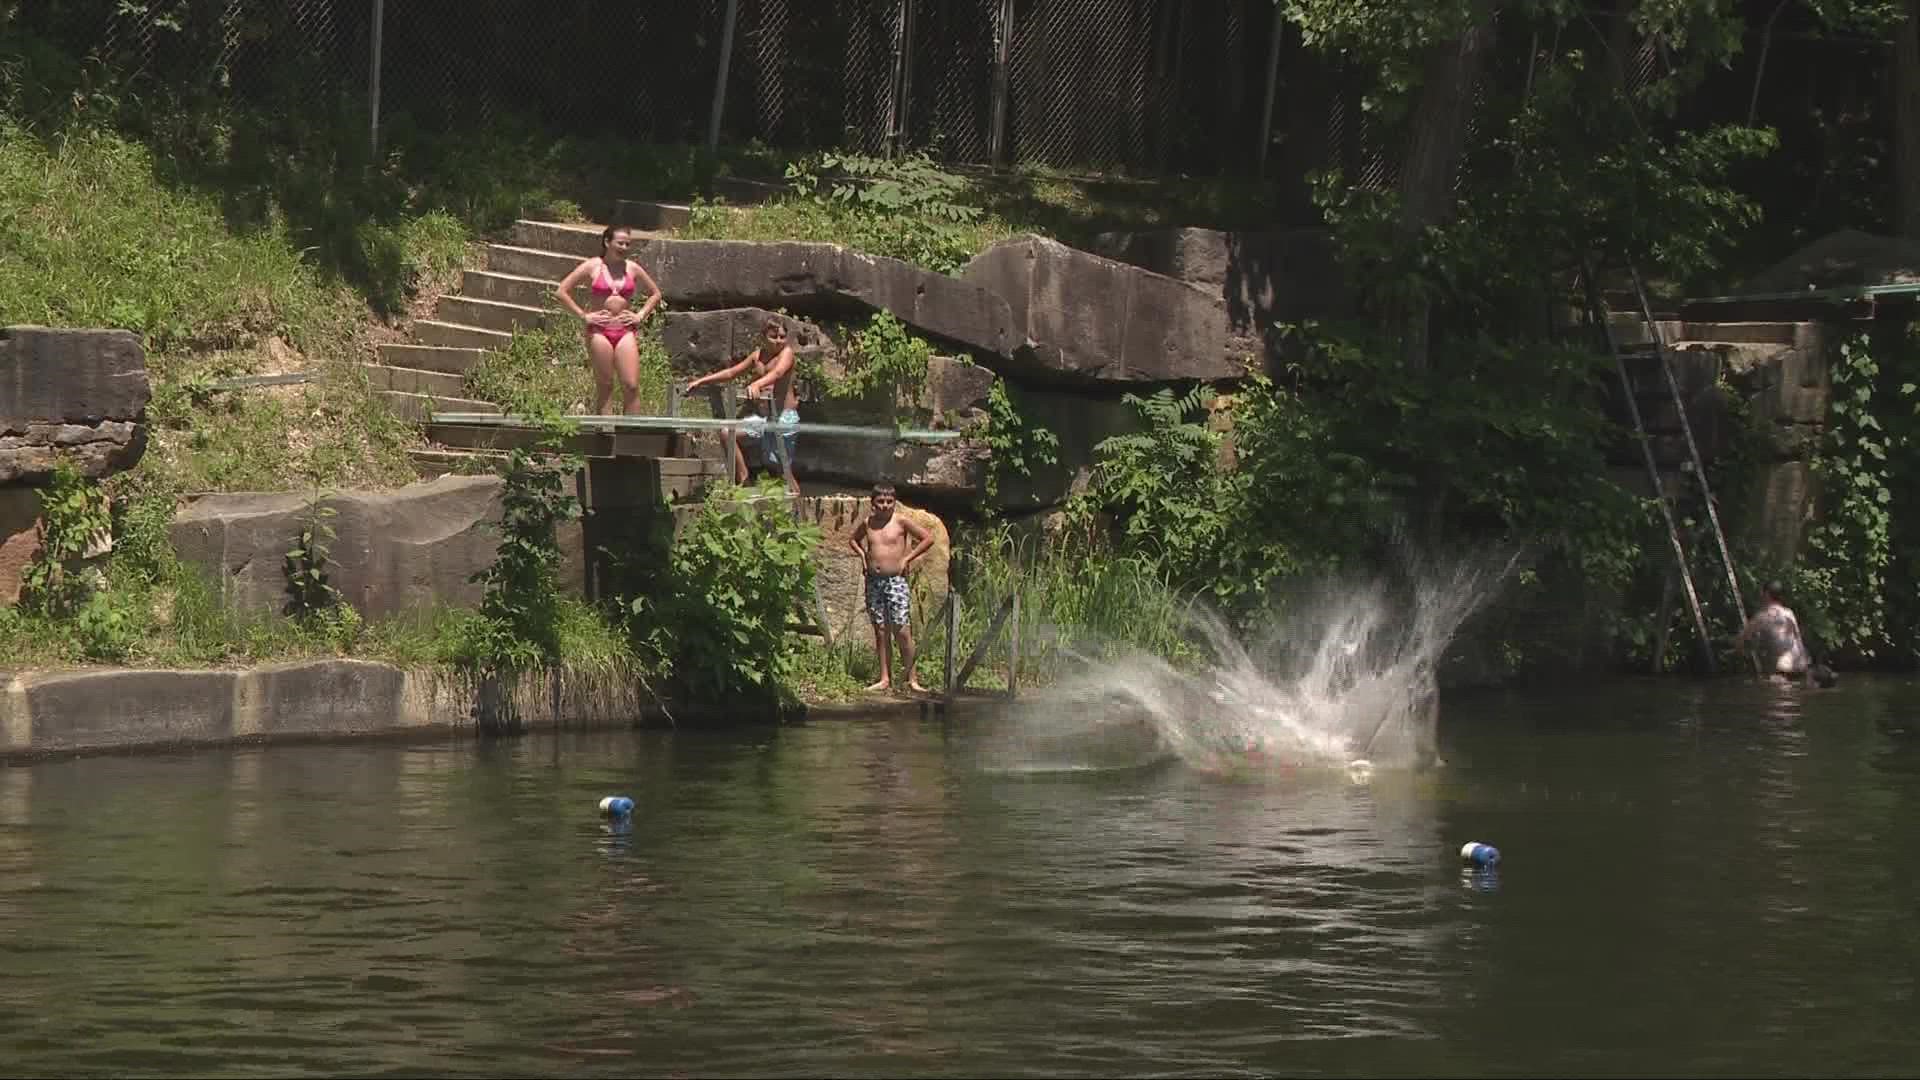 Ready to go for a swim? We explore three of the best swimming holes for the summer in Ohio.